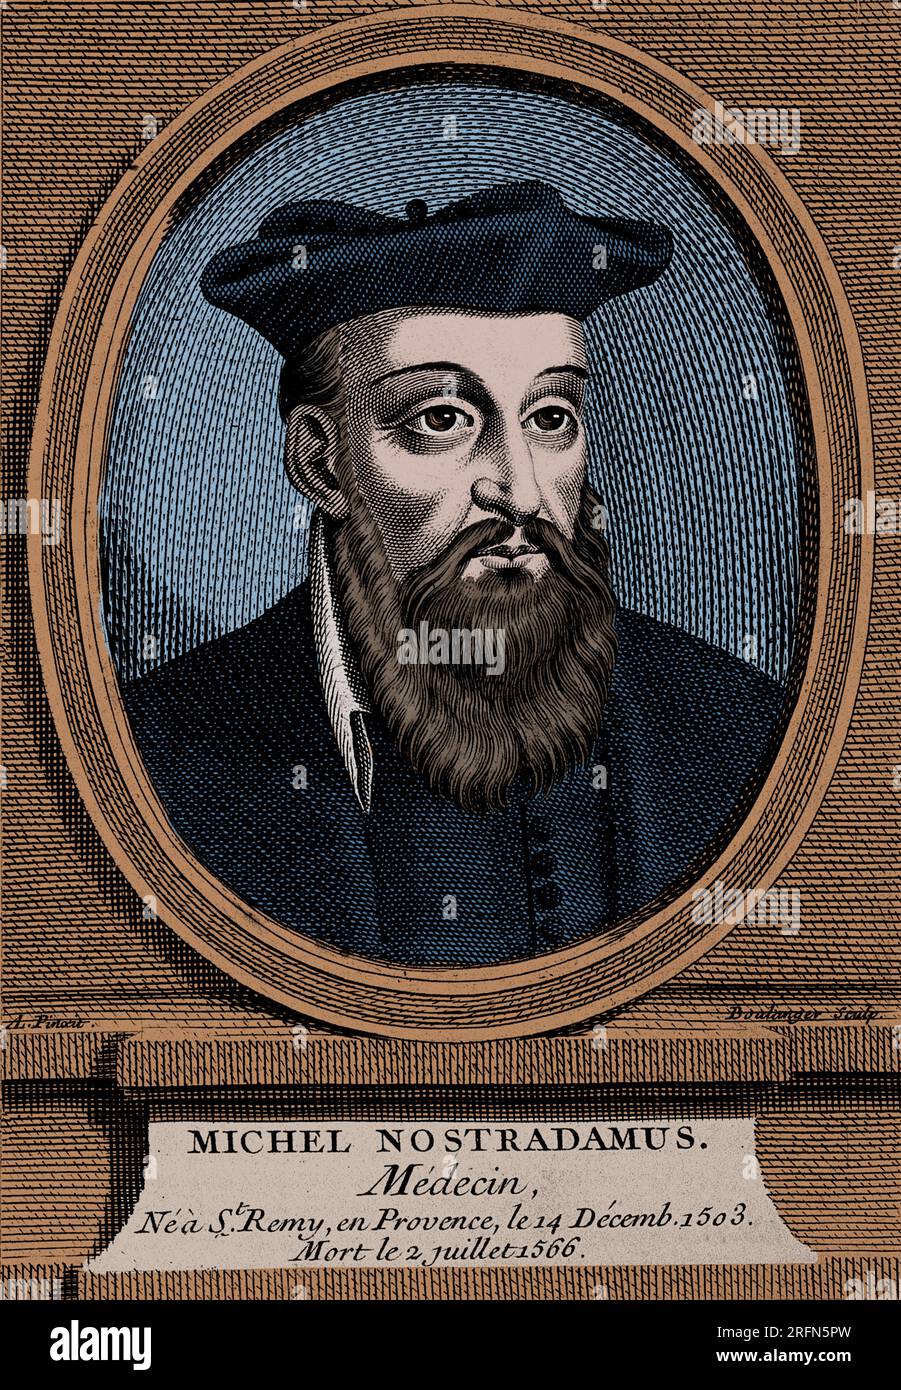 Michel de Nostredame AKA Nostradamus (December 14 or 21 1503 - July 2, 1566) was a French apothecary and reputed seer. Stock Photo